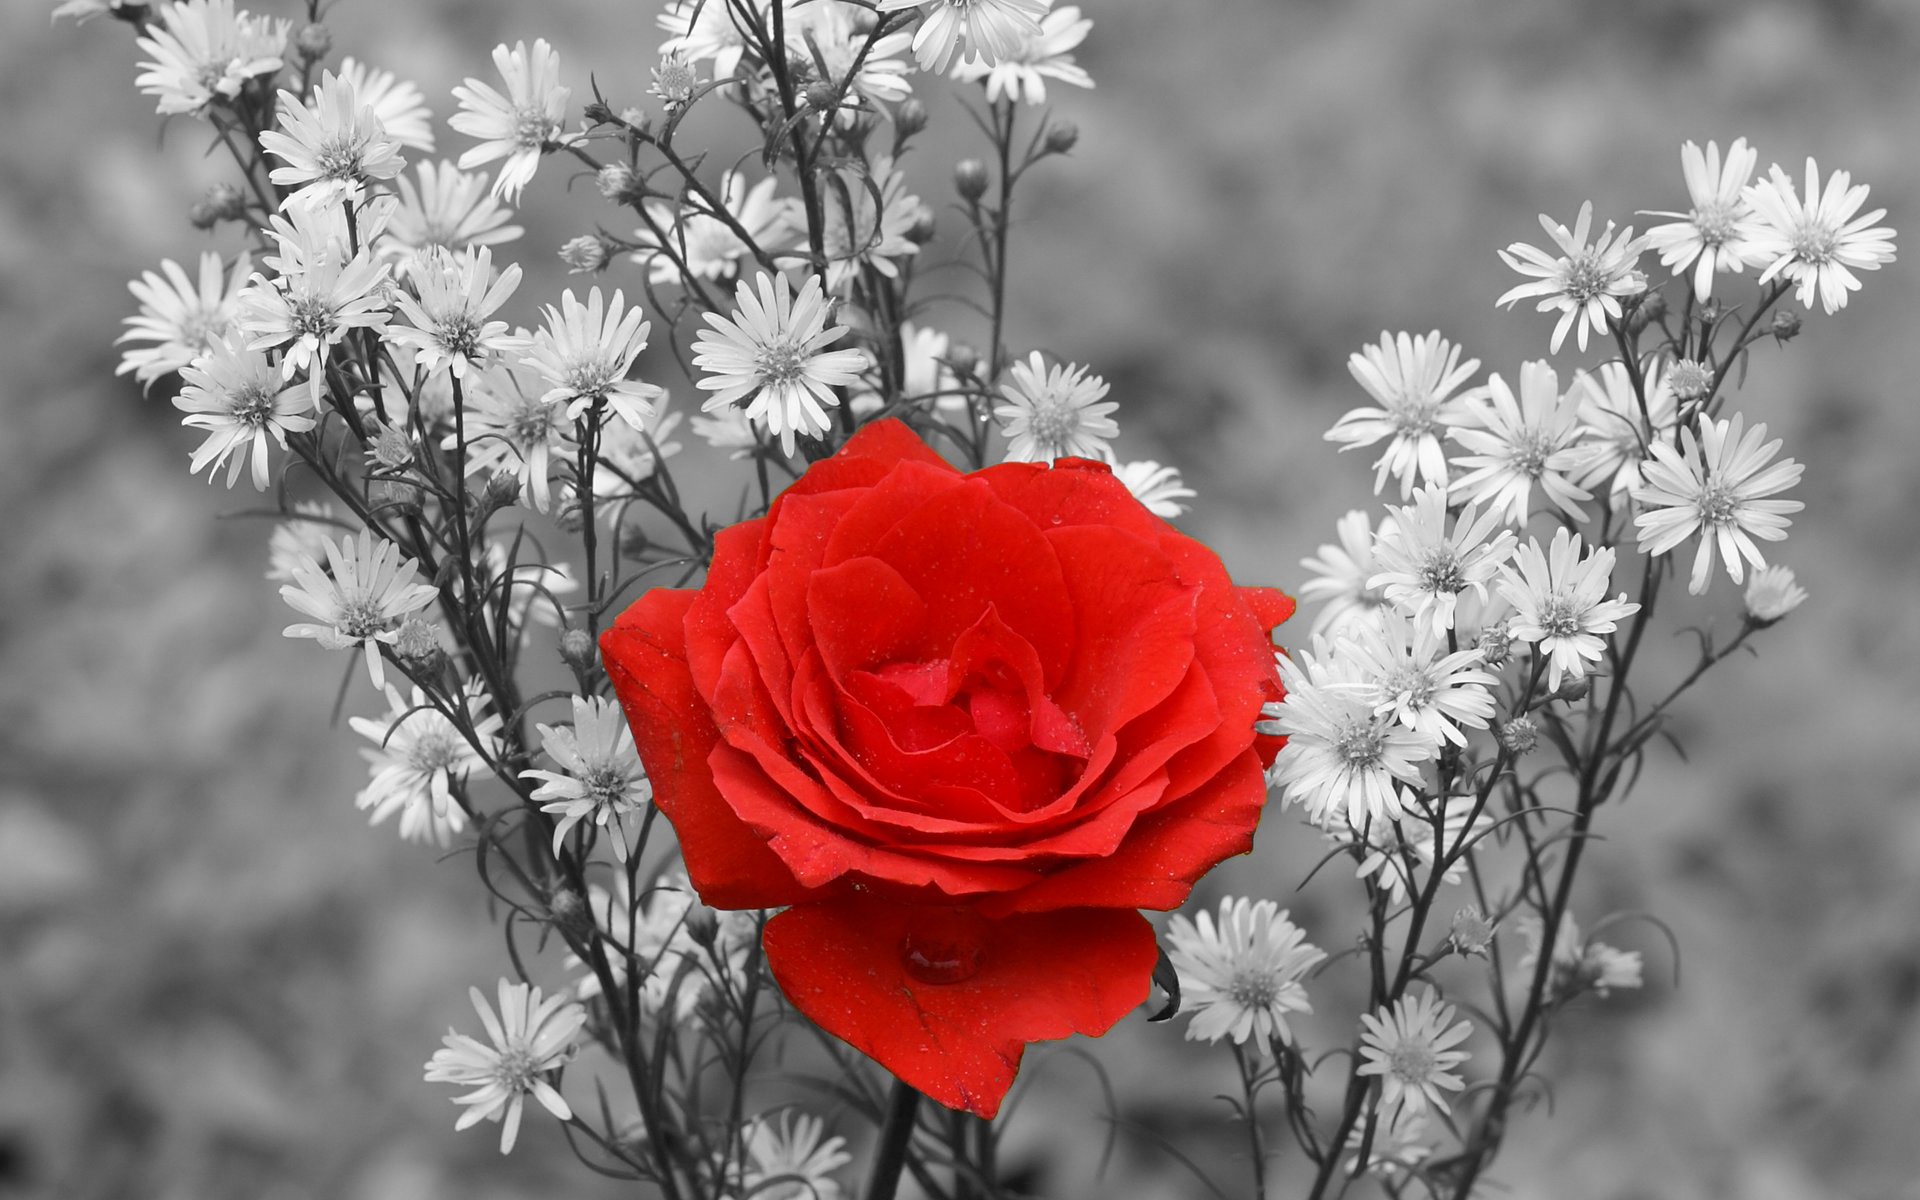 Red rose in nature with selective color